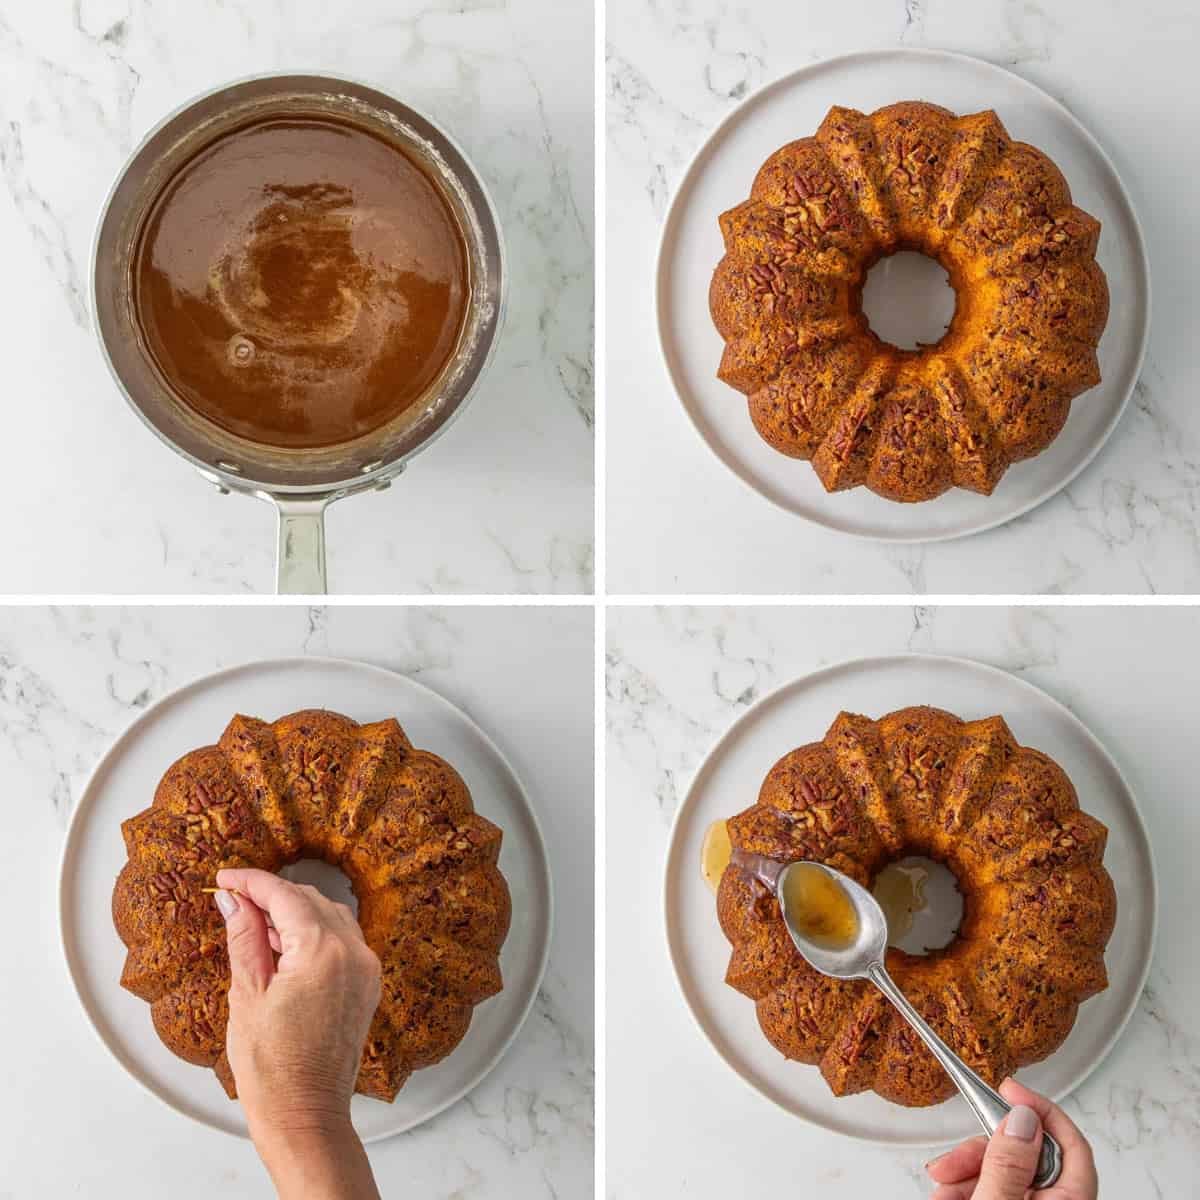 Step-by-step photos showing how to glaze a Bacardi rum cake.